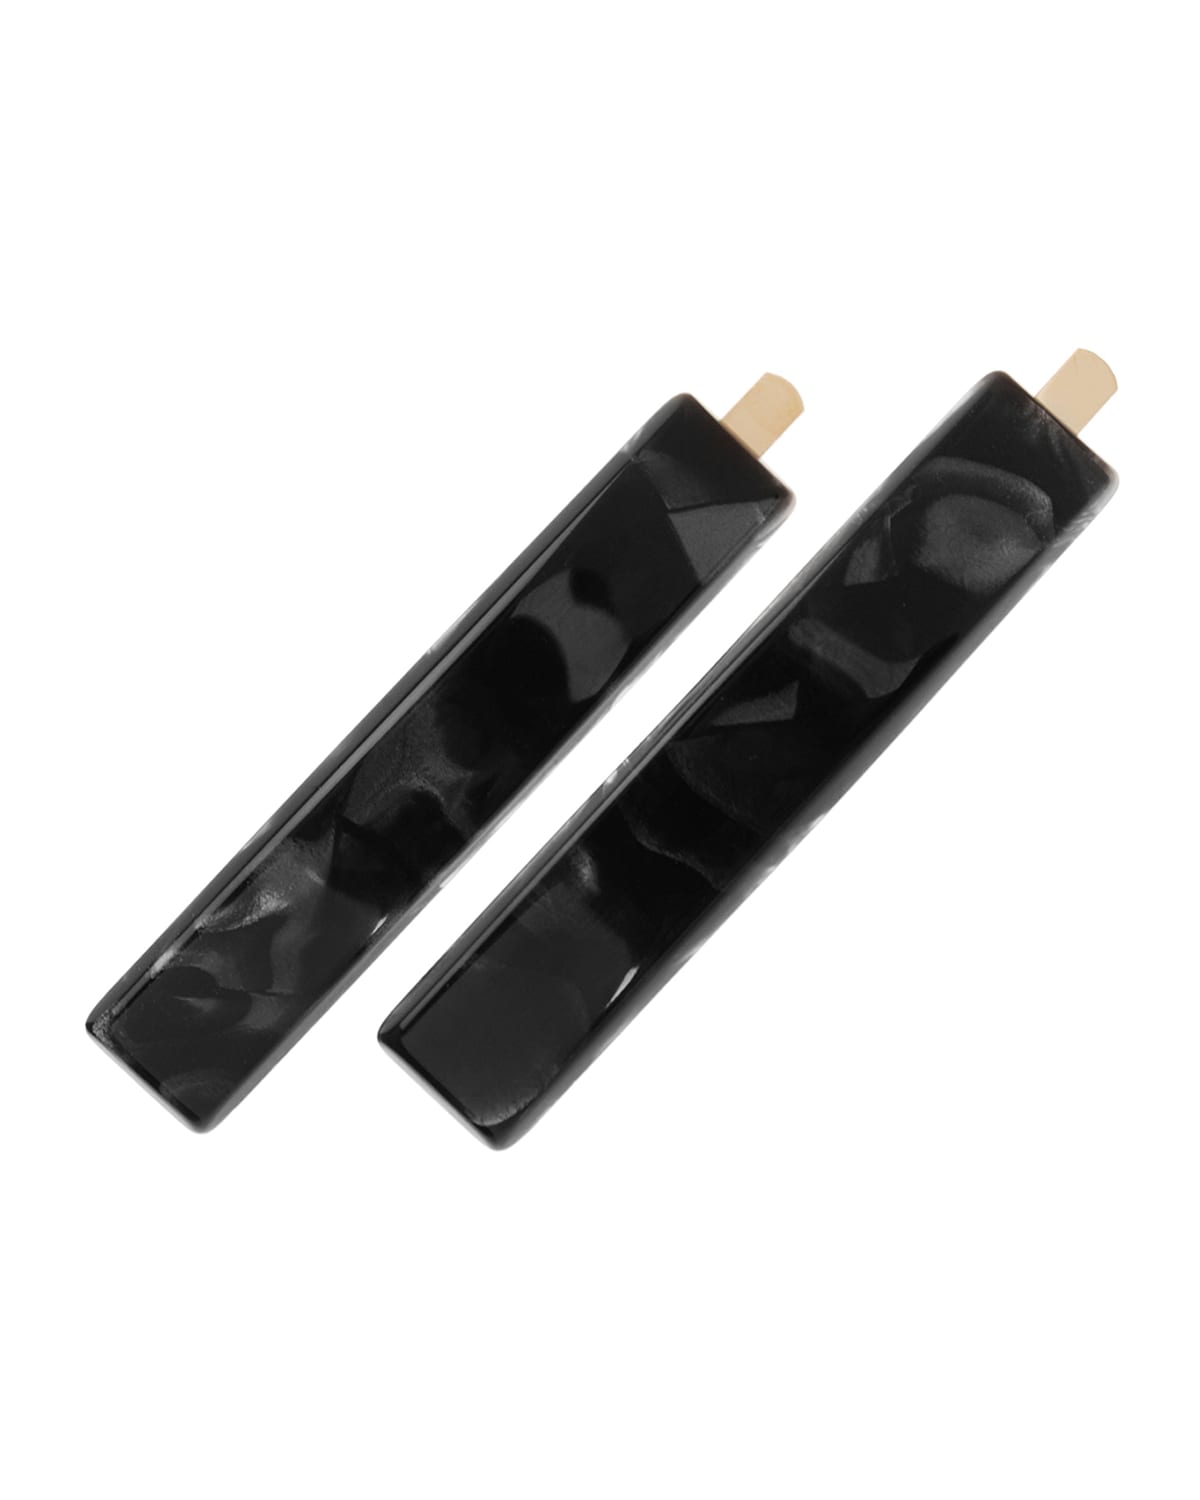 France Luxe Mod Bobby Pins, Set Of 2 In Nacro Black